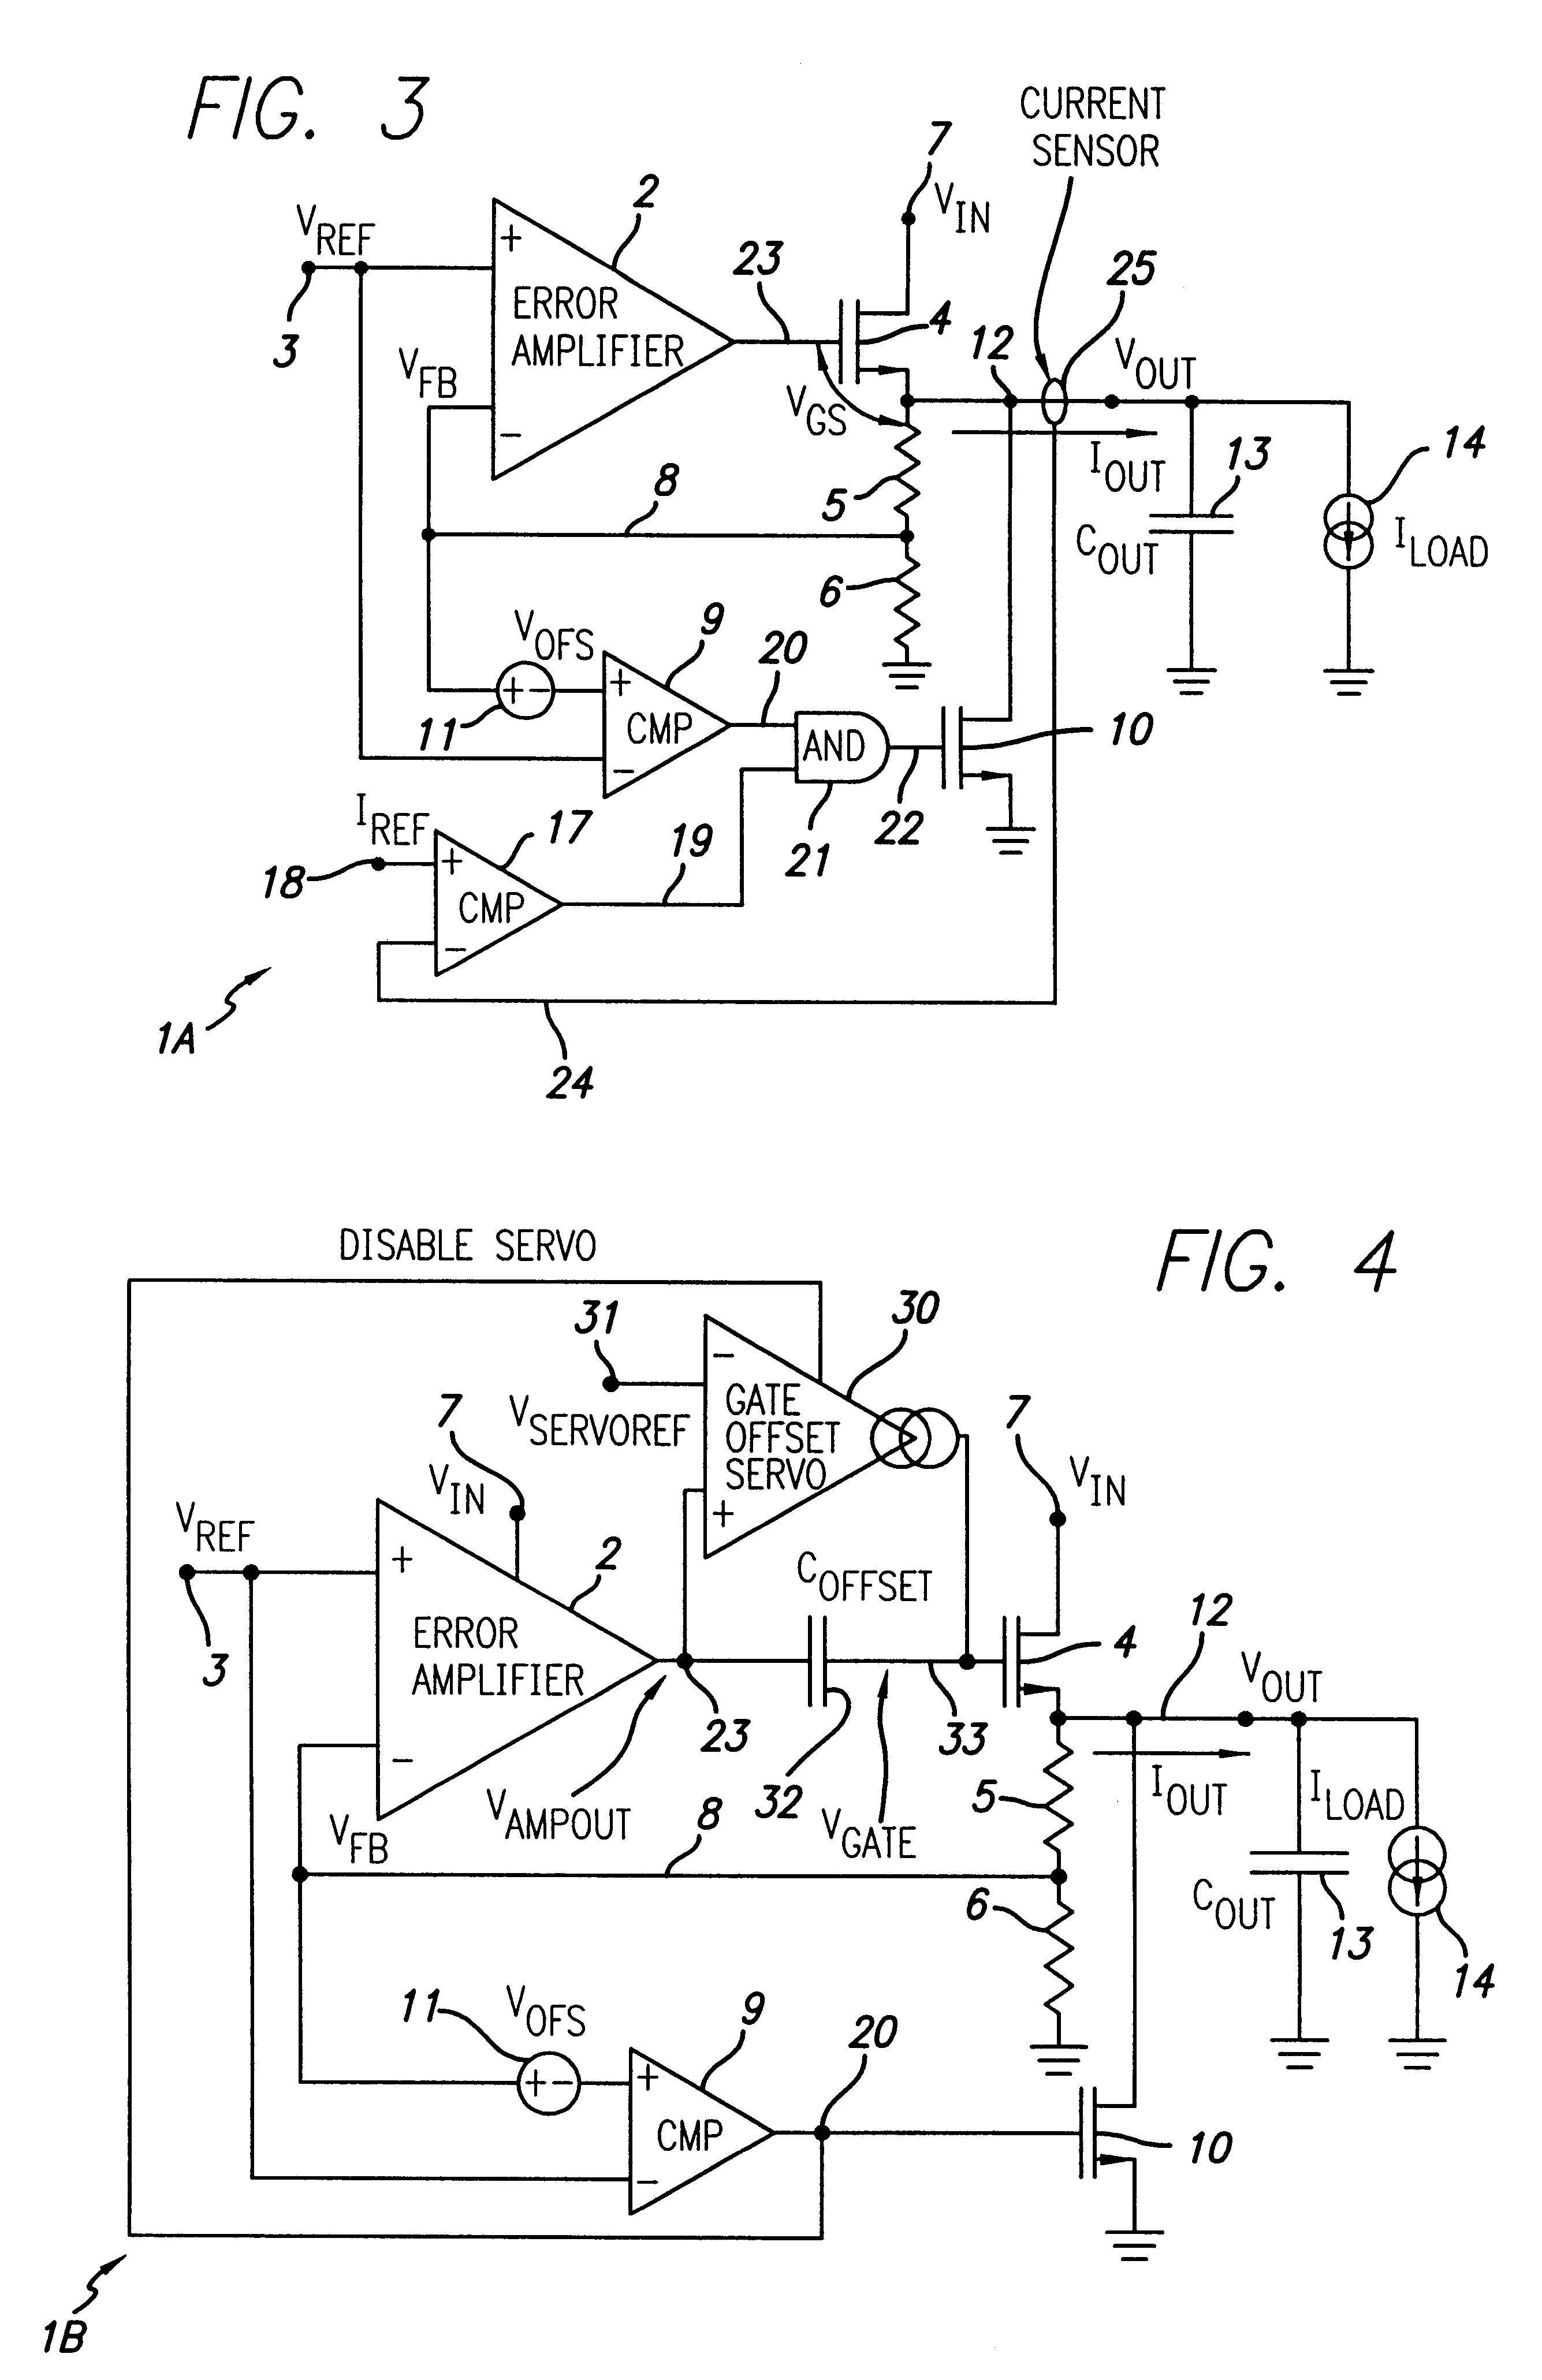 Overvoltage sensing and correction circuitry and method for low dropout voltage regulator